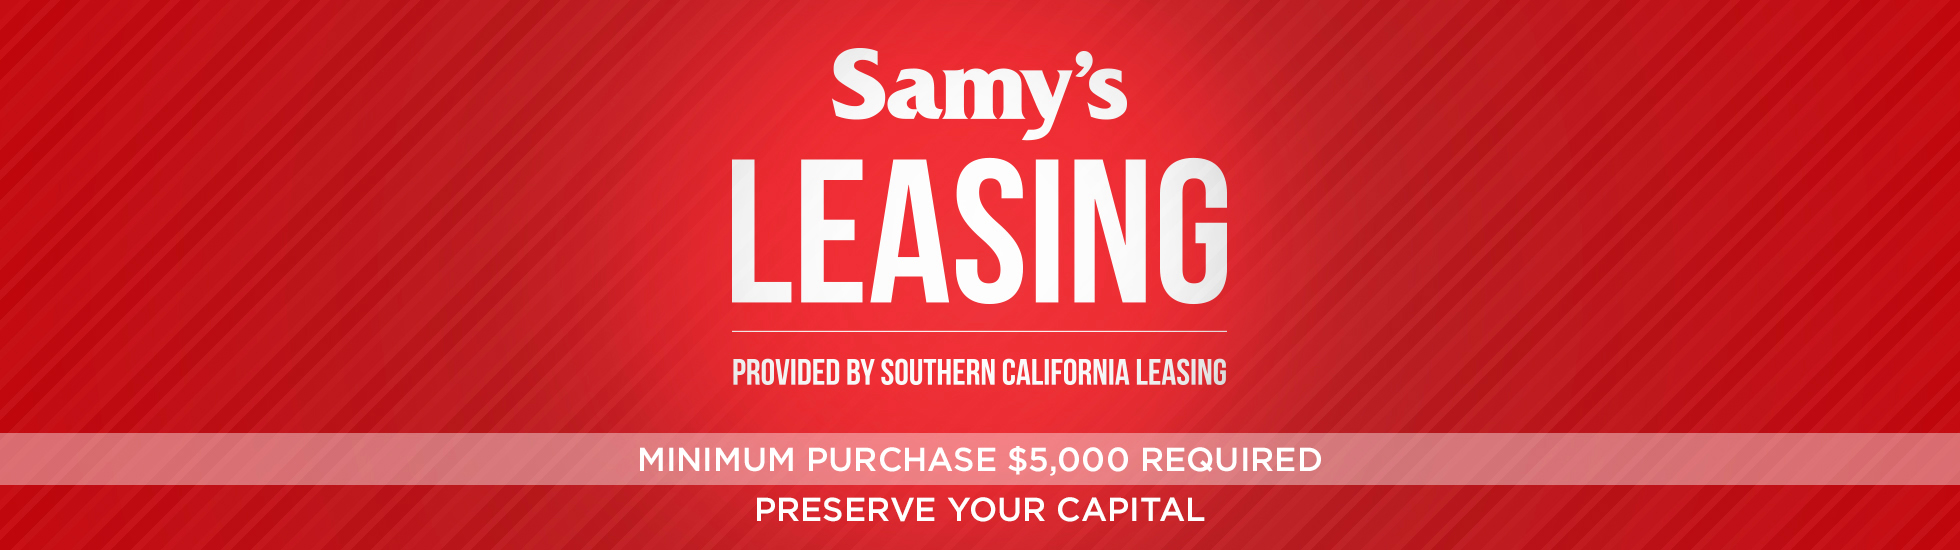 Samy's Leasing: Minimum Purchase $5,000 Required